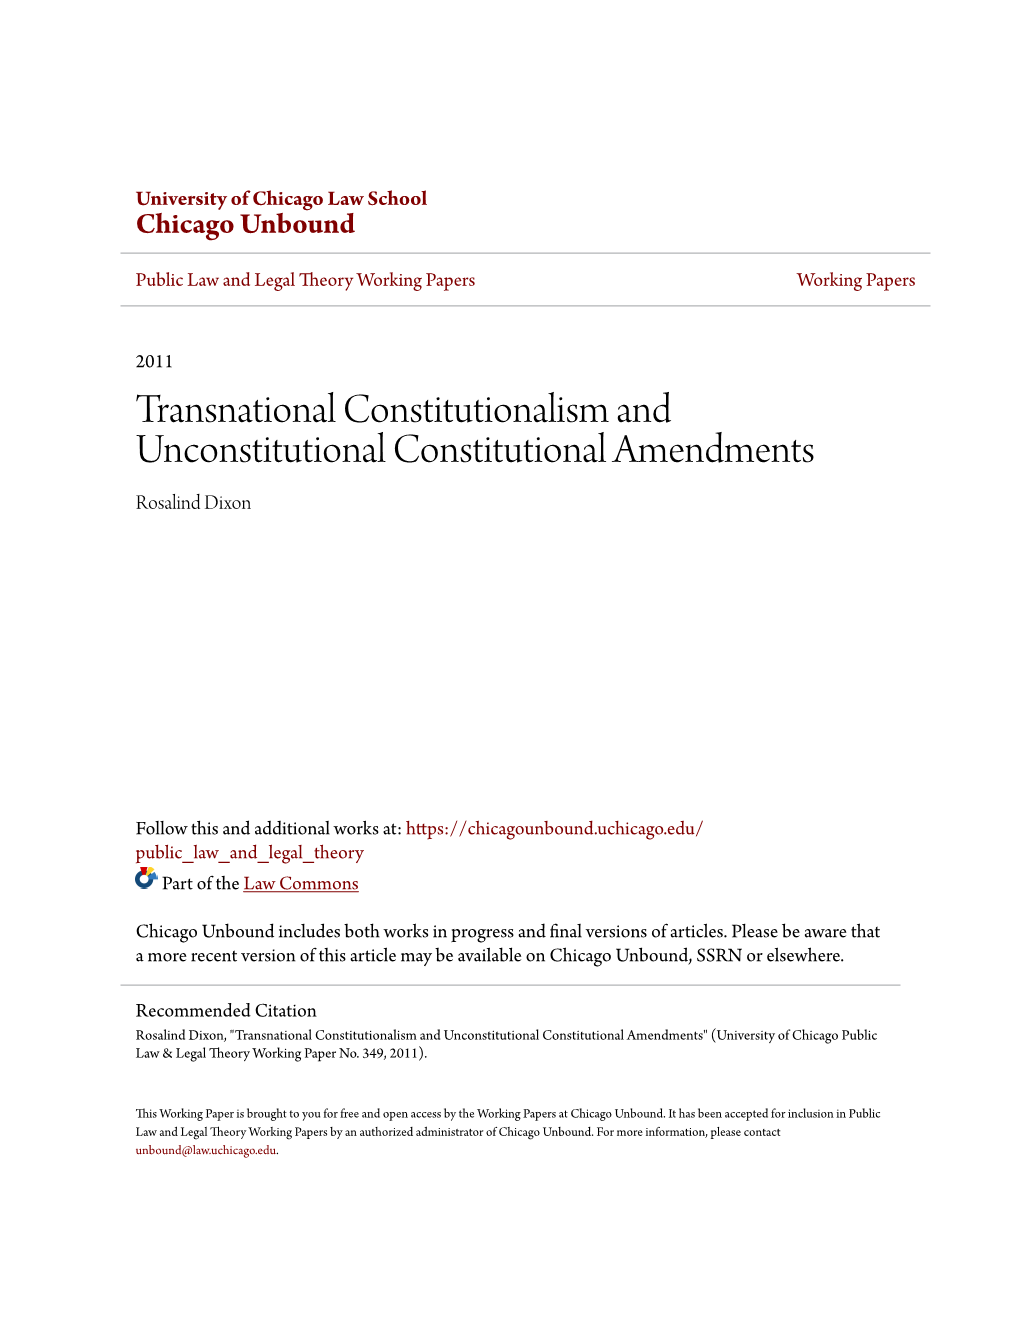 Transnational Constitutionalism and Unconstitutional Constitutional Amendments Rosalind Dixon